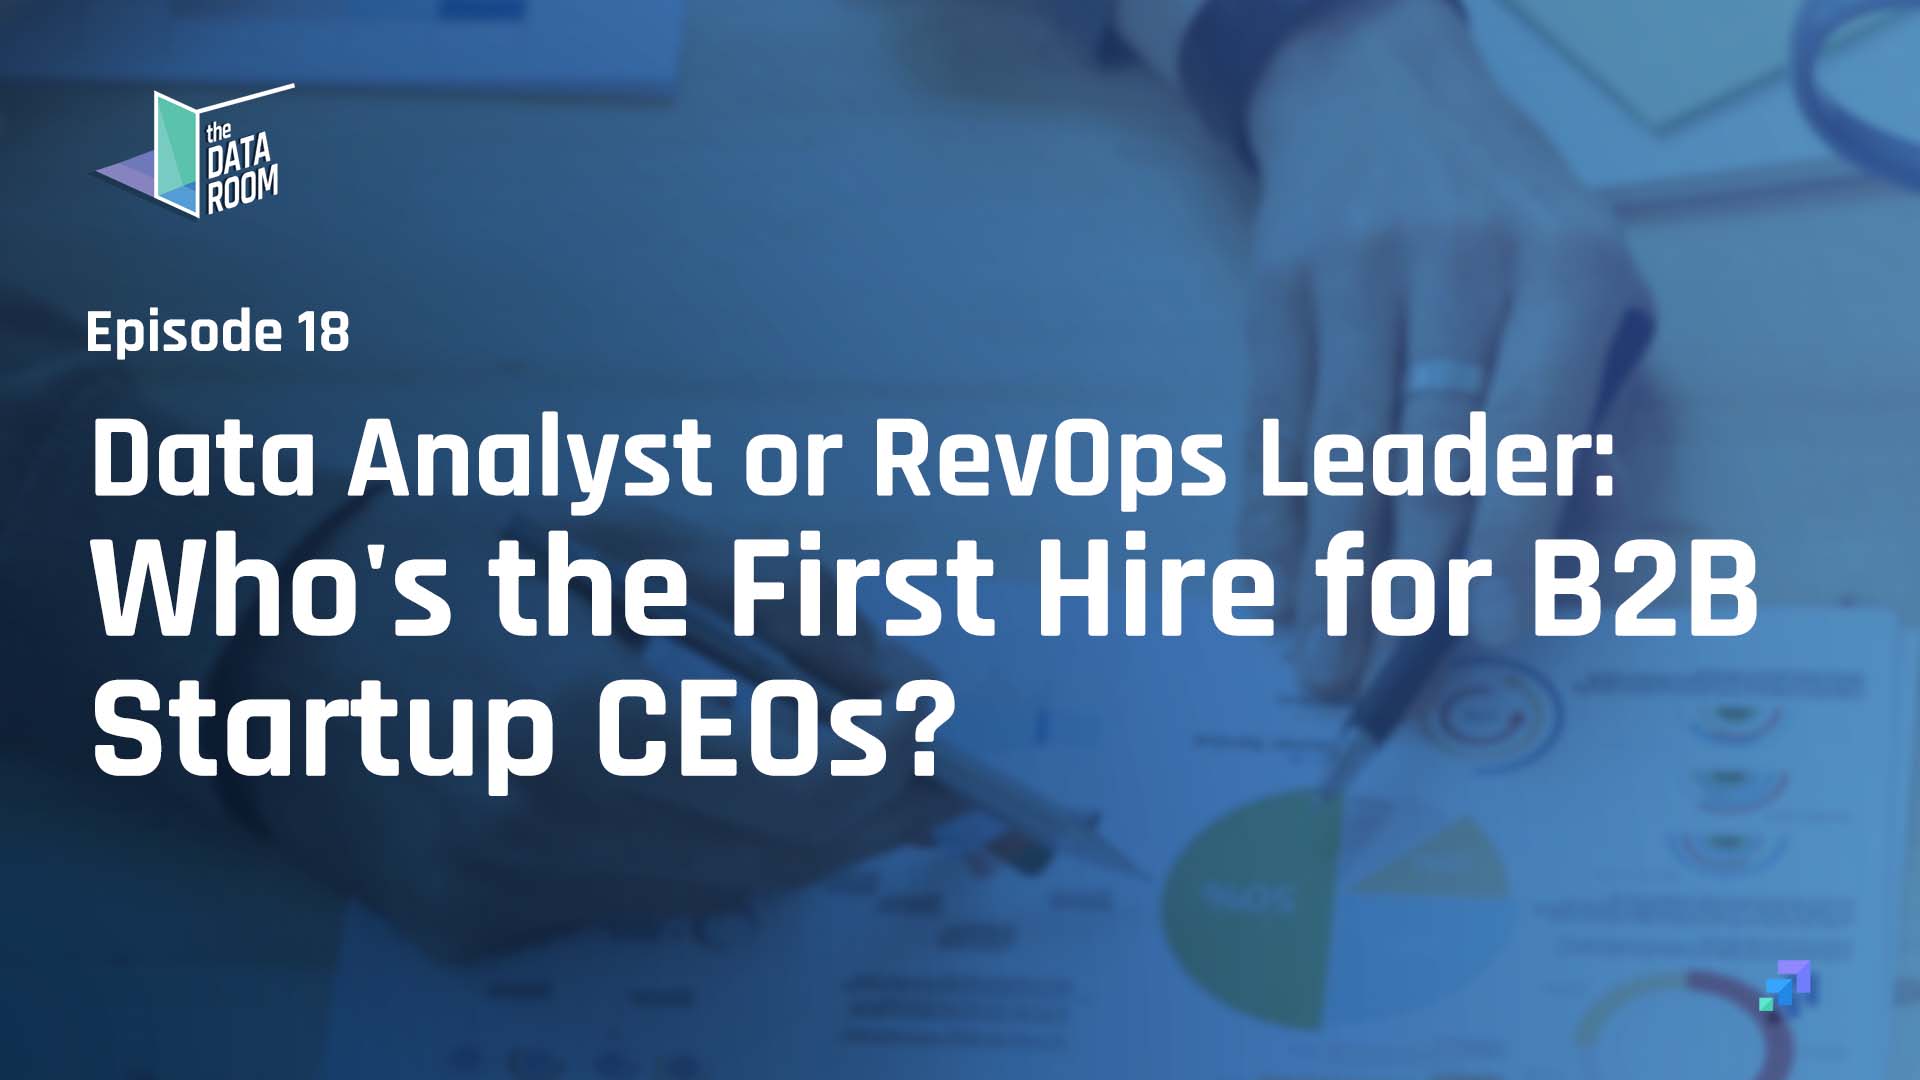 Data Analyst or RevOps Leader: Who's the First Hire for B2B Startup CEOs?